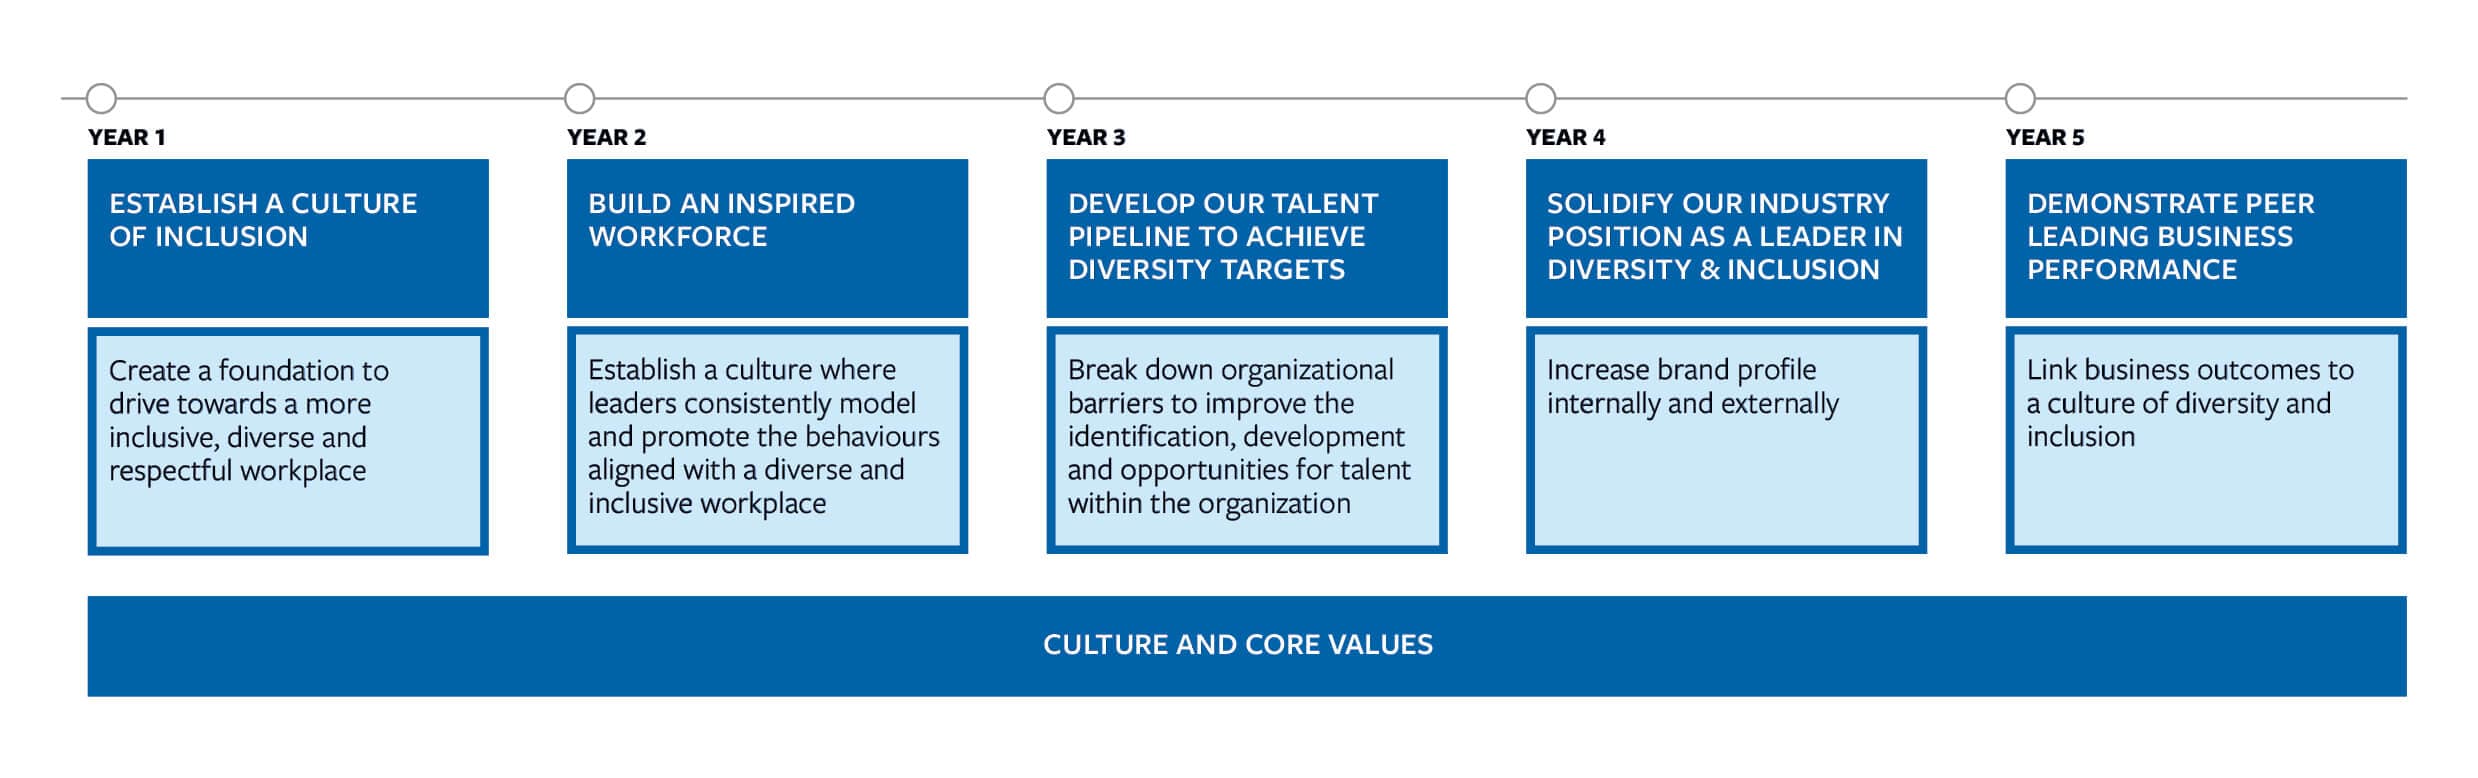 A graphic outlining Sherritt’s culture and core values: Year 1 – Establish a culture of inclusion: Create a foundation to drive towards a more inclusive, diverse and respectful workplace; Year 2 – Build an inspired workforce: Establish a culture where leaders consistently model and promote the behaviours aligned with a diverse and inclusive workplace; Year 3 – Develop our talent pipeline to achieve diversity targets: Break down organizational barriers to improve the identification, development and opportunities for talent within the organization; Year 4 – Solidify our industry position as a leader in diversity and inclusion: Increase brand profile internally and externally; Year 5 – Demonstrate peer-leading business performance: Link business outcomes to a culture of diversity and inclusion